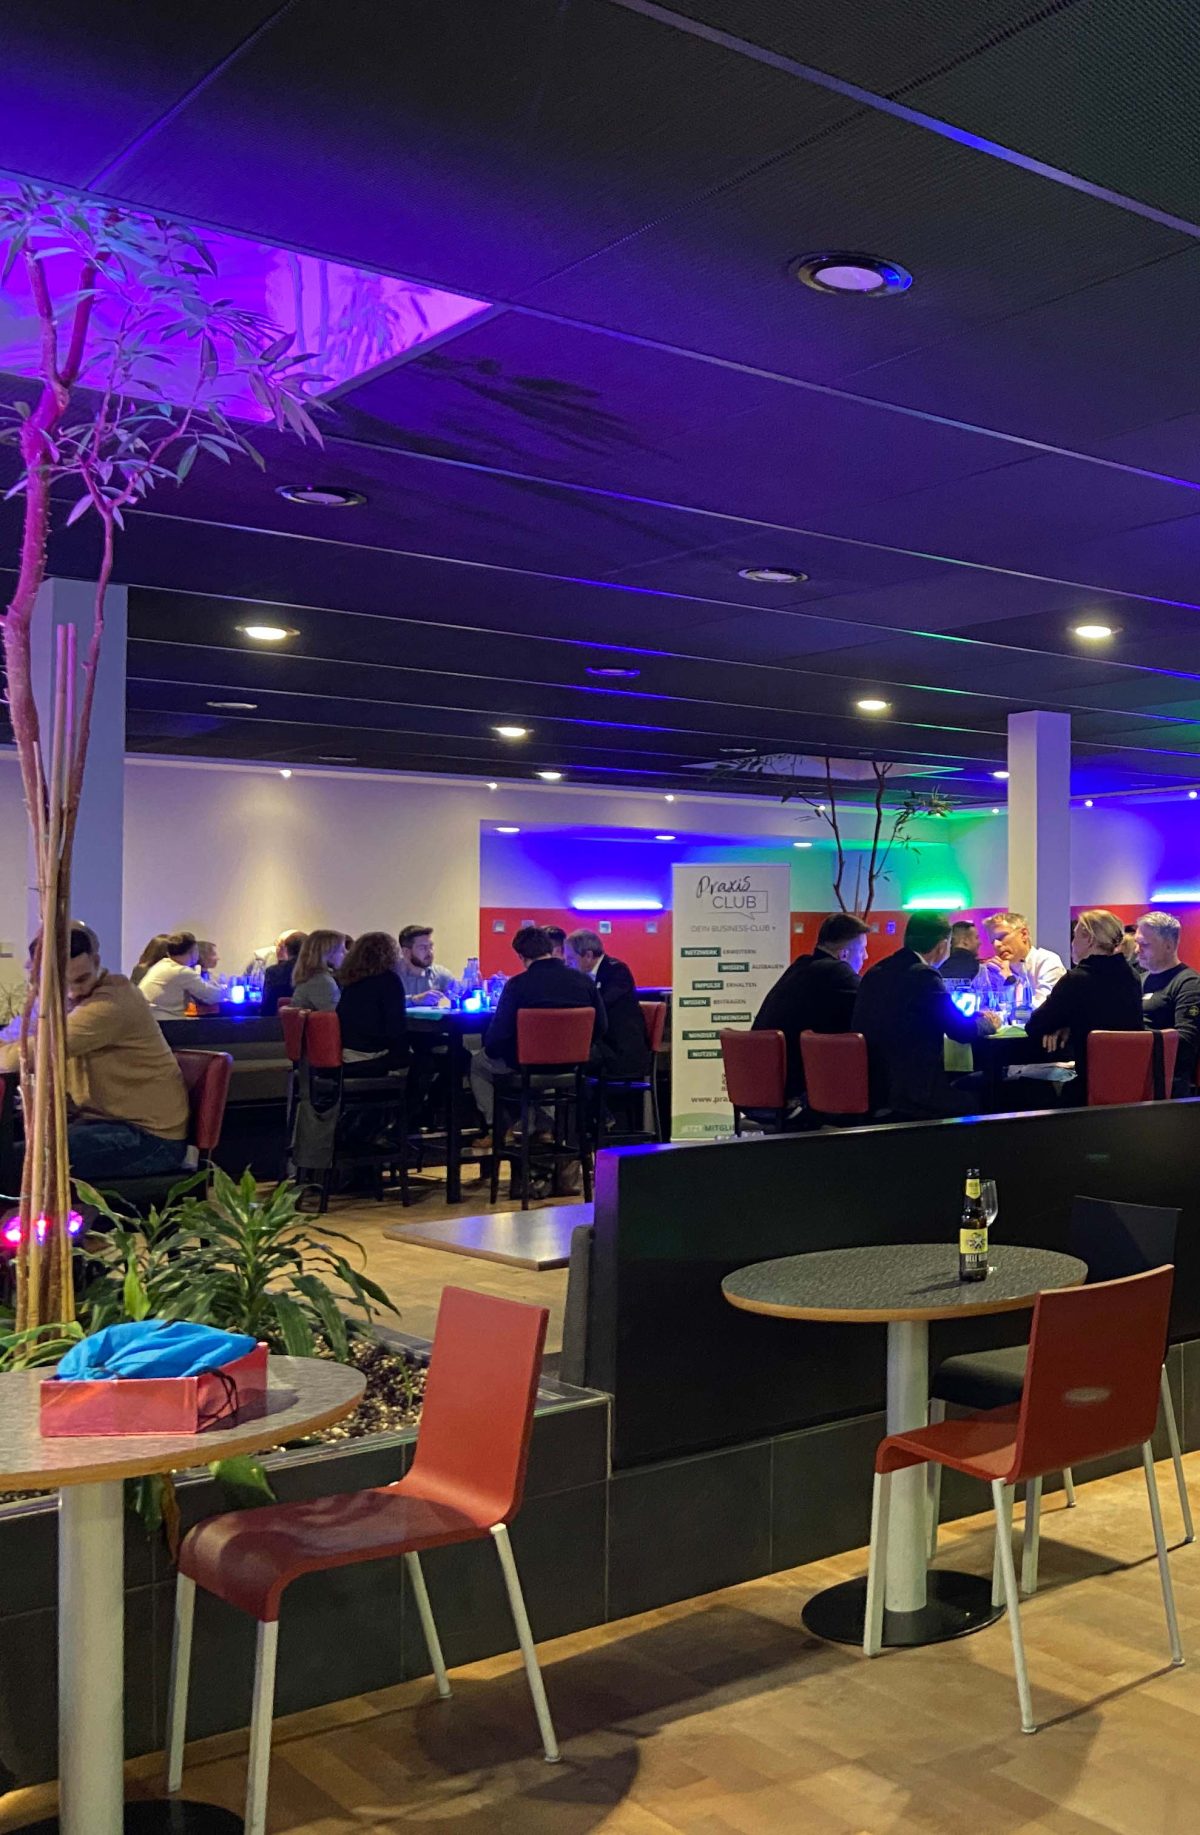 LogiLab, QYOU Marketing GmbH: Optimal Seating Arrangement at Networking Events